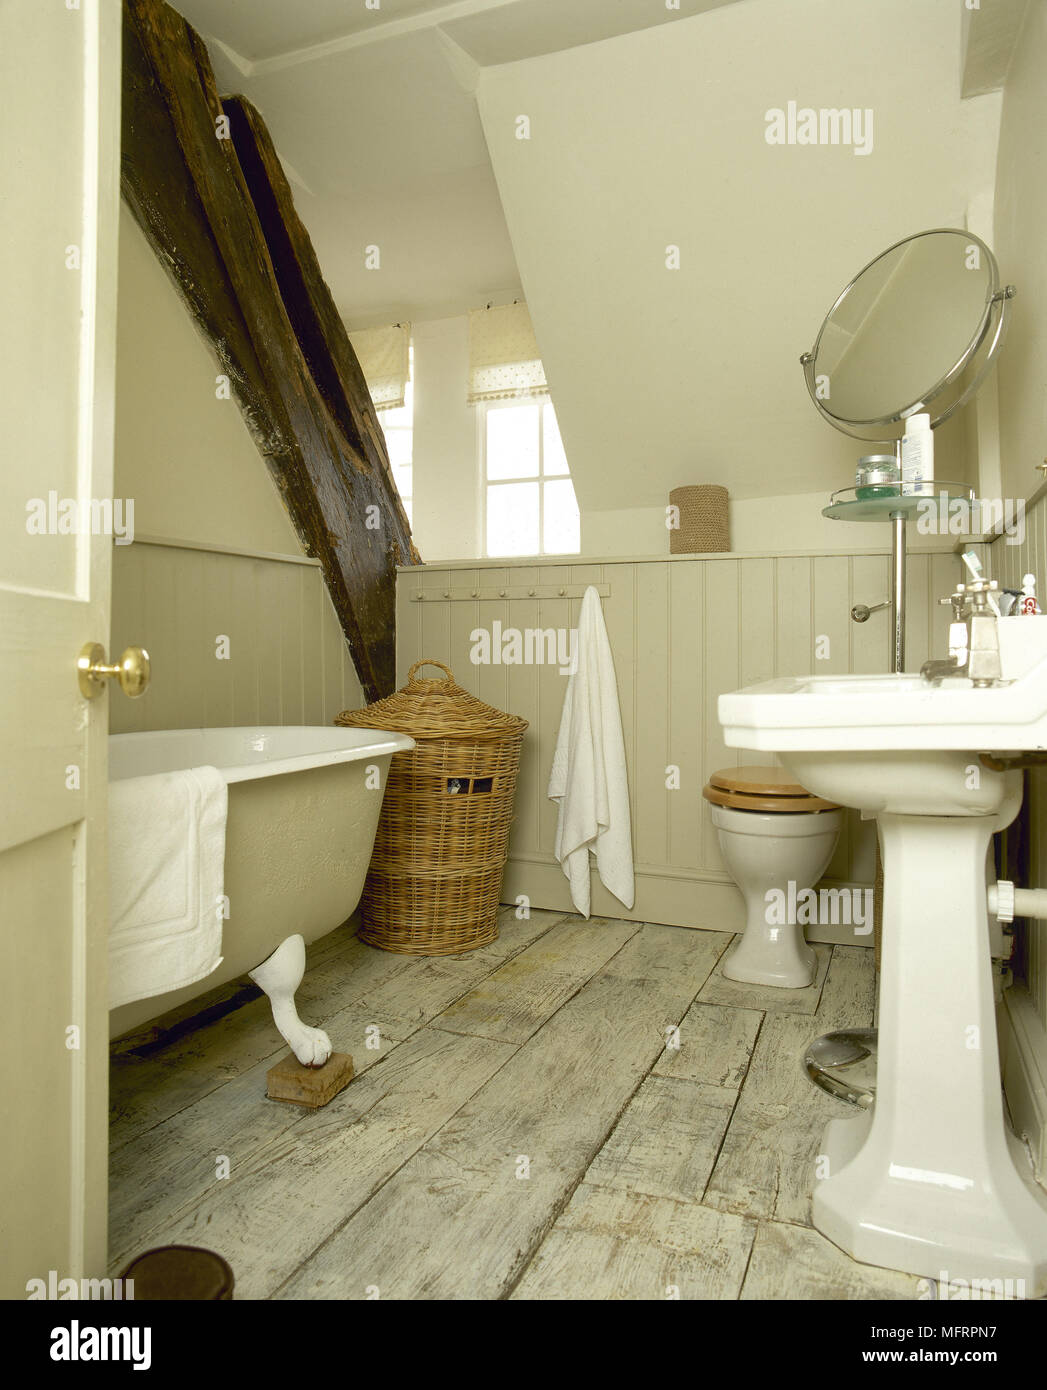 Rustic Country Bathroom With Wood Wainscoting Whitewashed